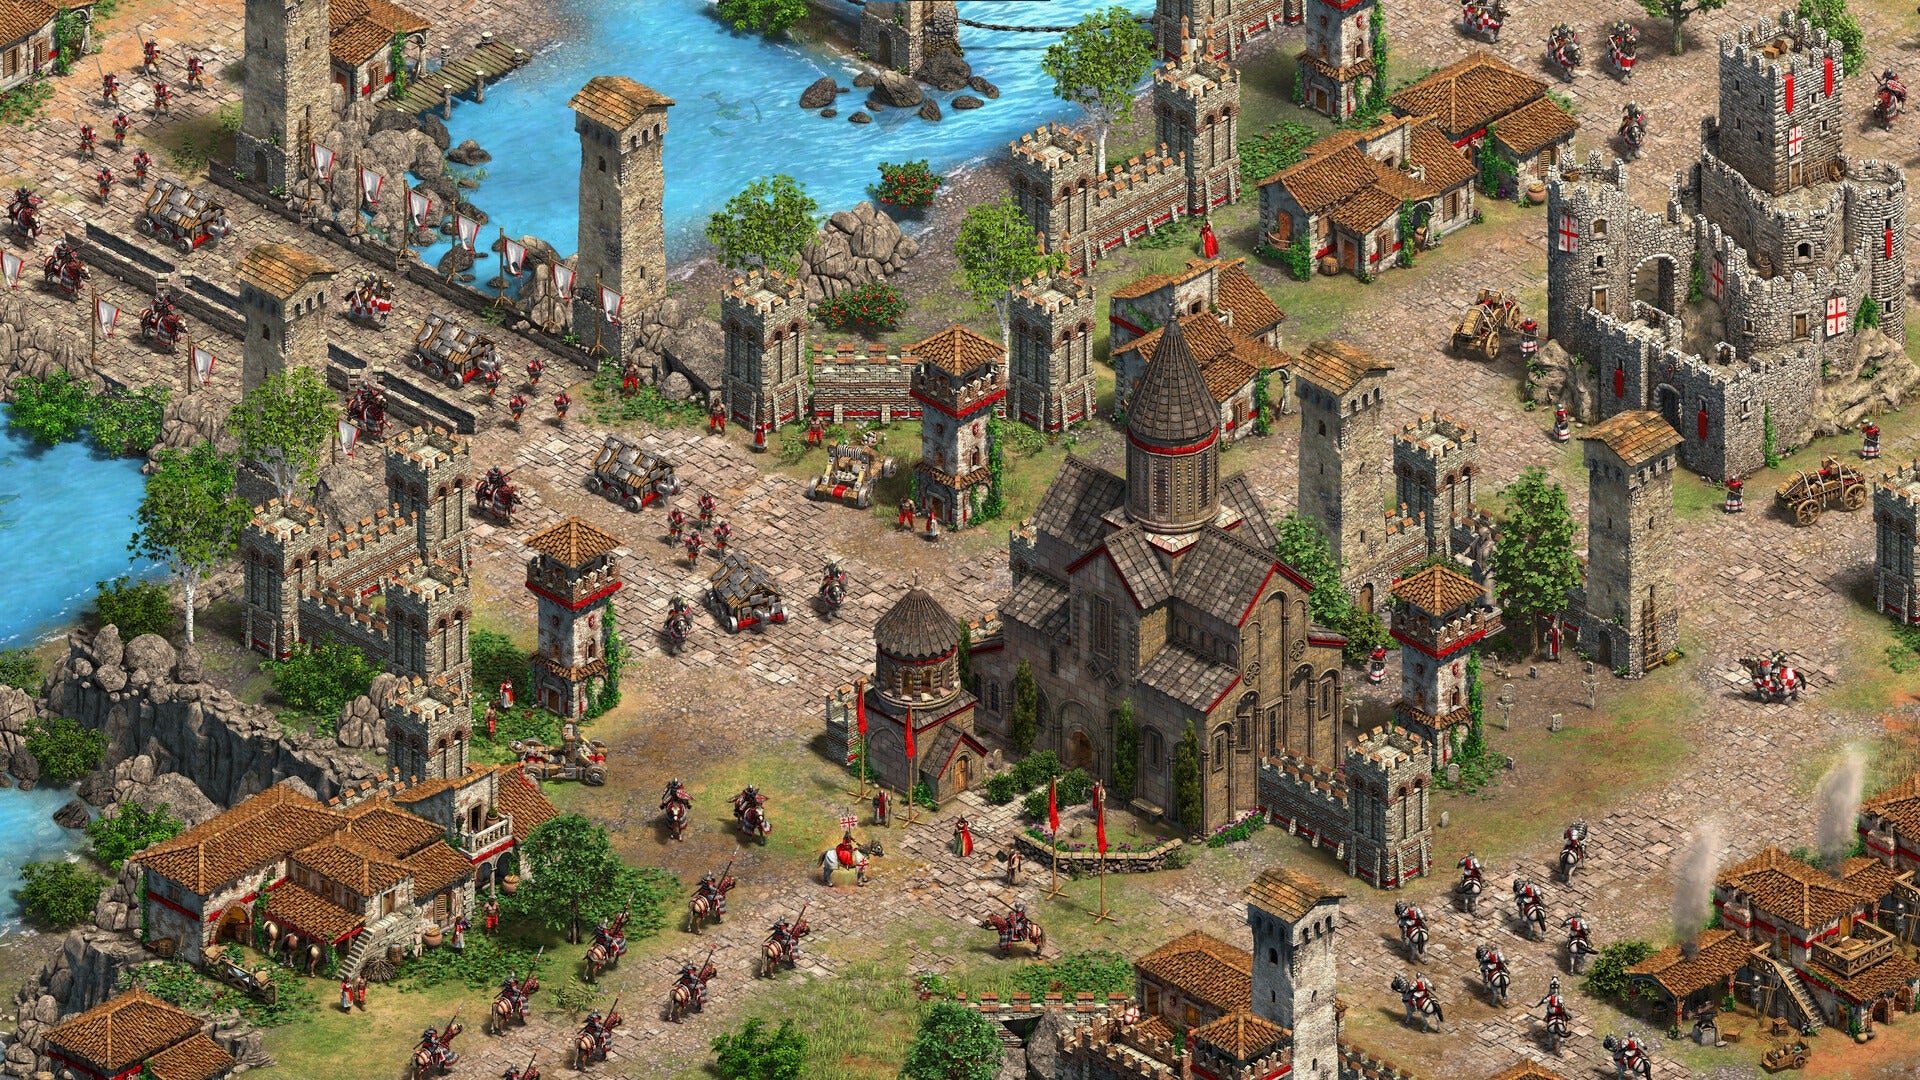 Age of Empires II: Definitive Edition - The Mountain Royals (Standard Edition) - למחשב